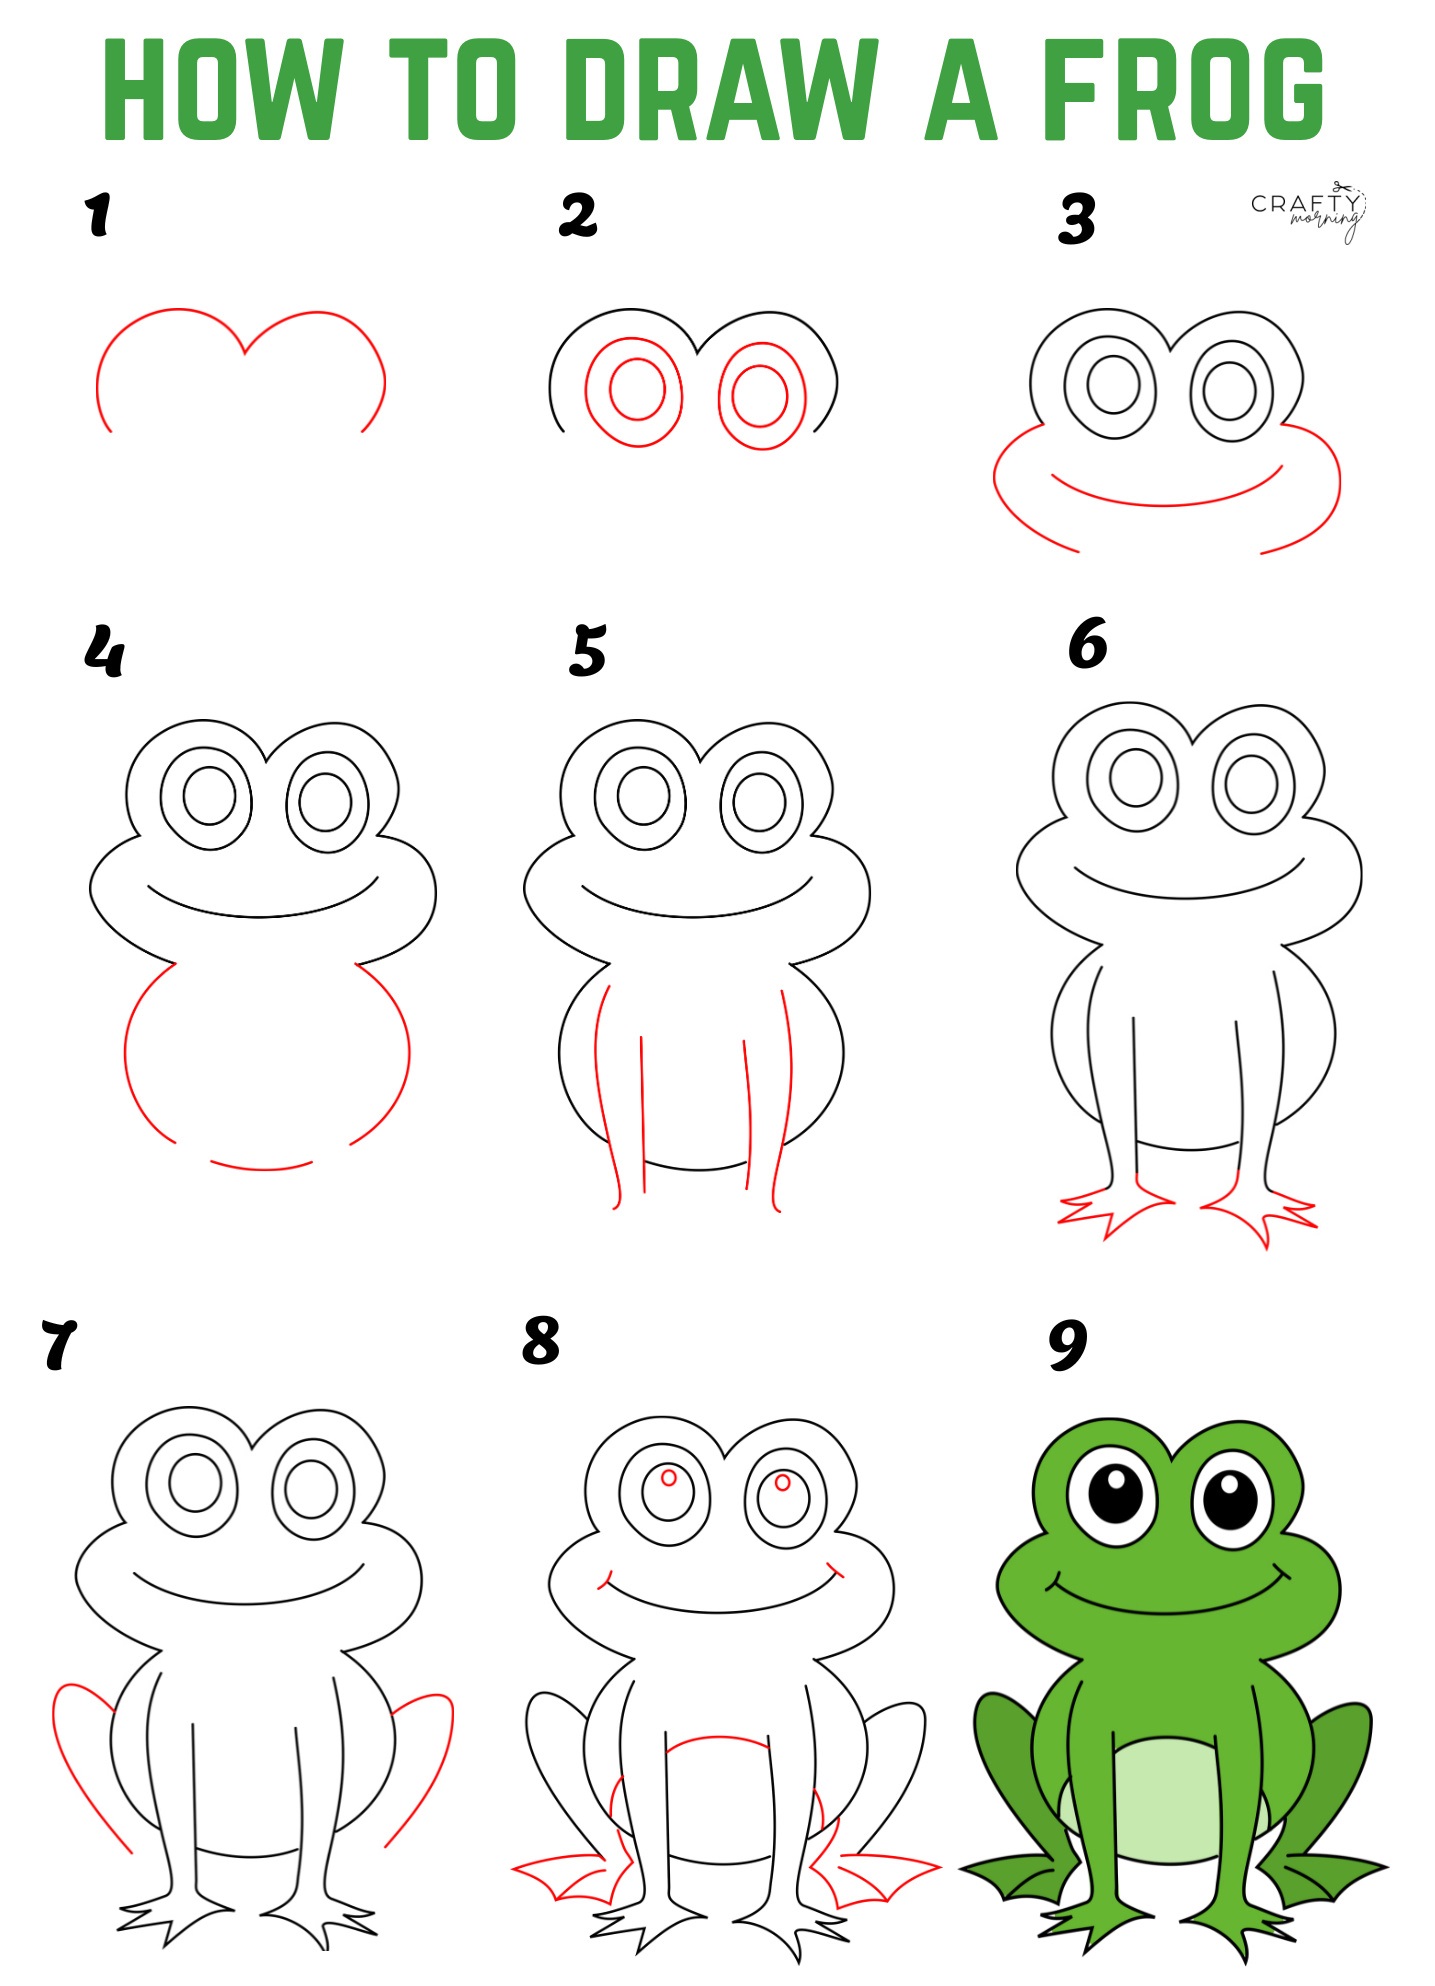 How to Draw a Frog - Easy Step by Step Drawing-saigonsouth.com.vn